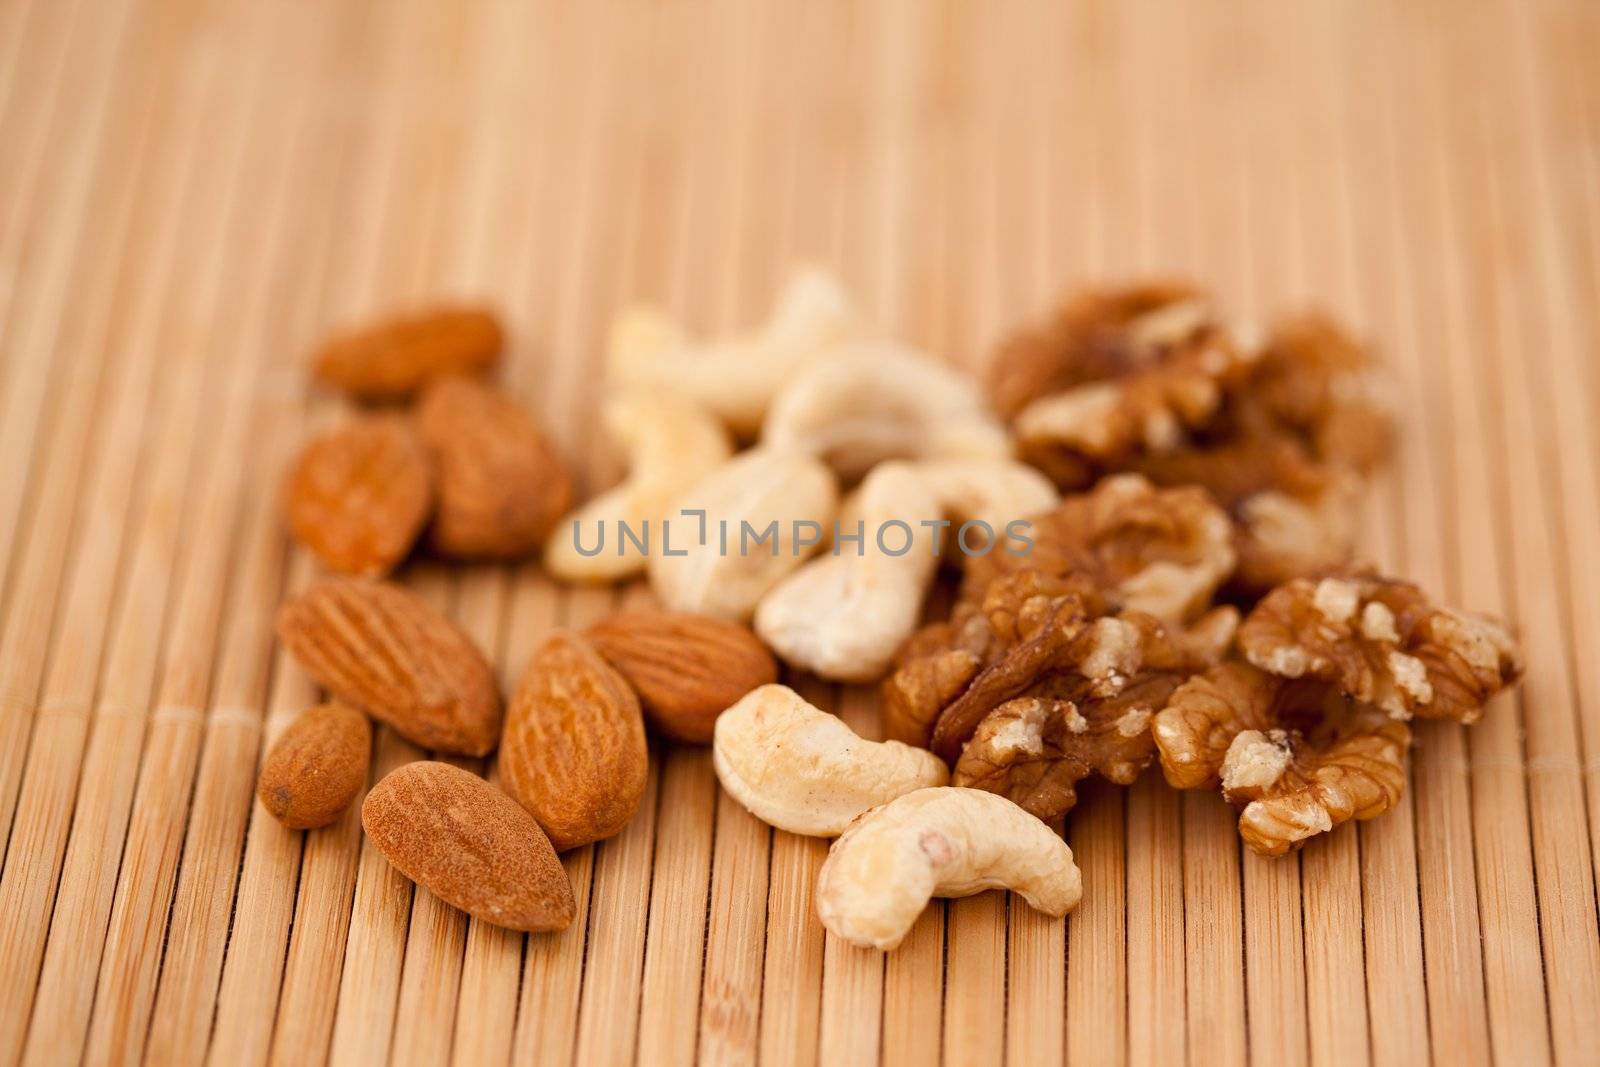 Nuts laid out together on a wooden placemat